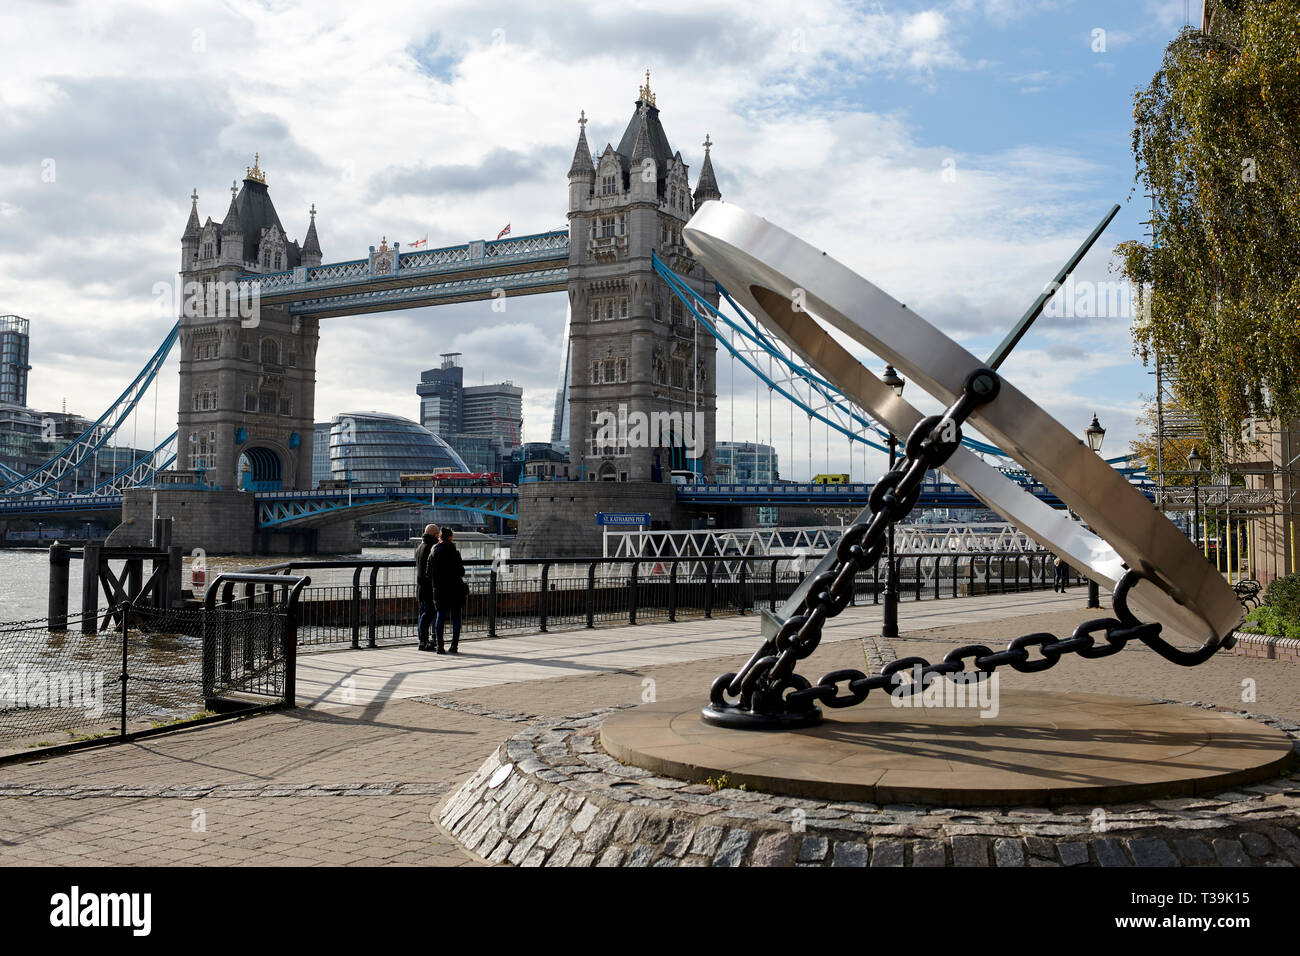 London's Tower Bridge with the Timepiece Sundial in the foreground on the north bank of the River Thames, England, UK. Stock Photo